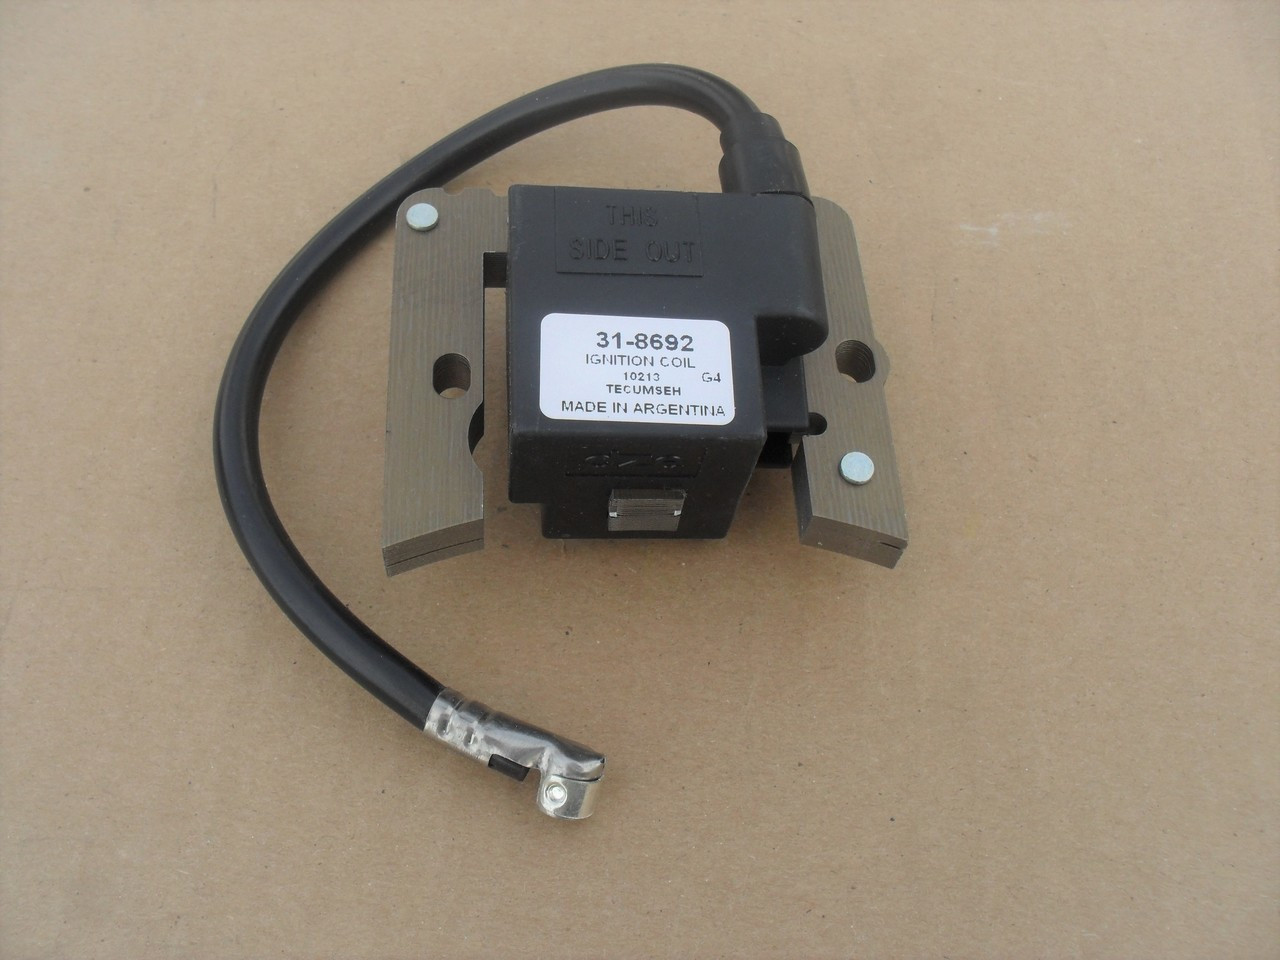 Ignition Coil for Toro 38630 38631 38632 38635 38620 38621 38622 38630 38590 38547 38559 38540 38080 38085 38079 38085C 38087 38540 38543 38559 38560 38573 38574 38640 38641 38642 38645 38650 38651 38652 35135A 35135B